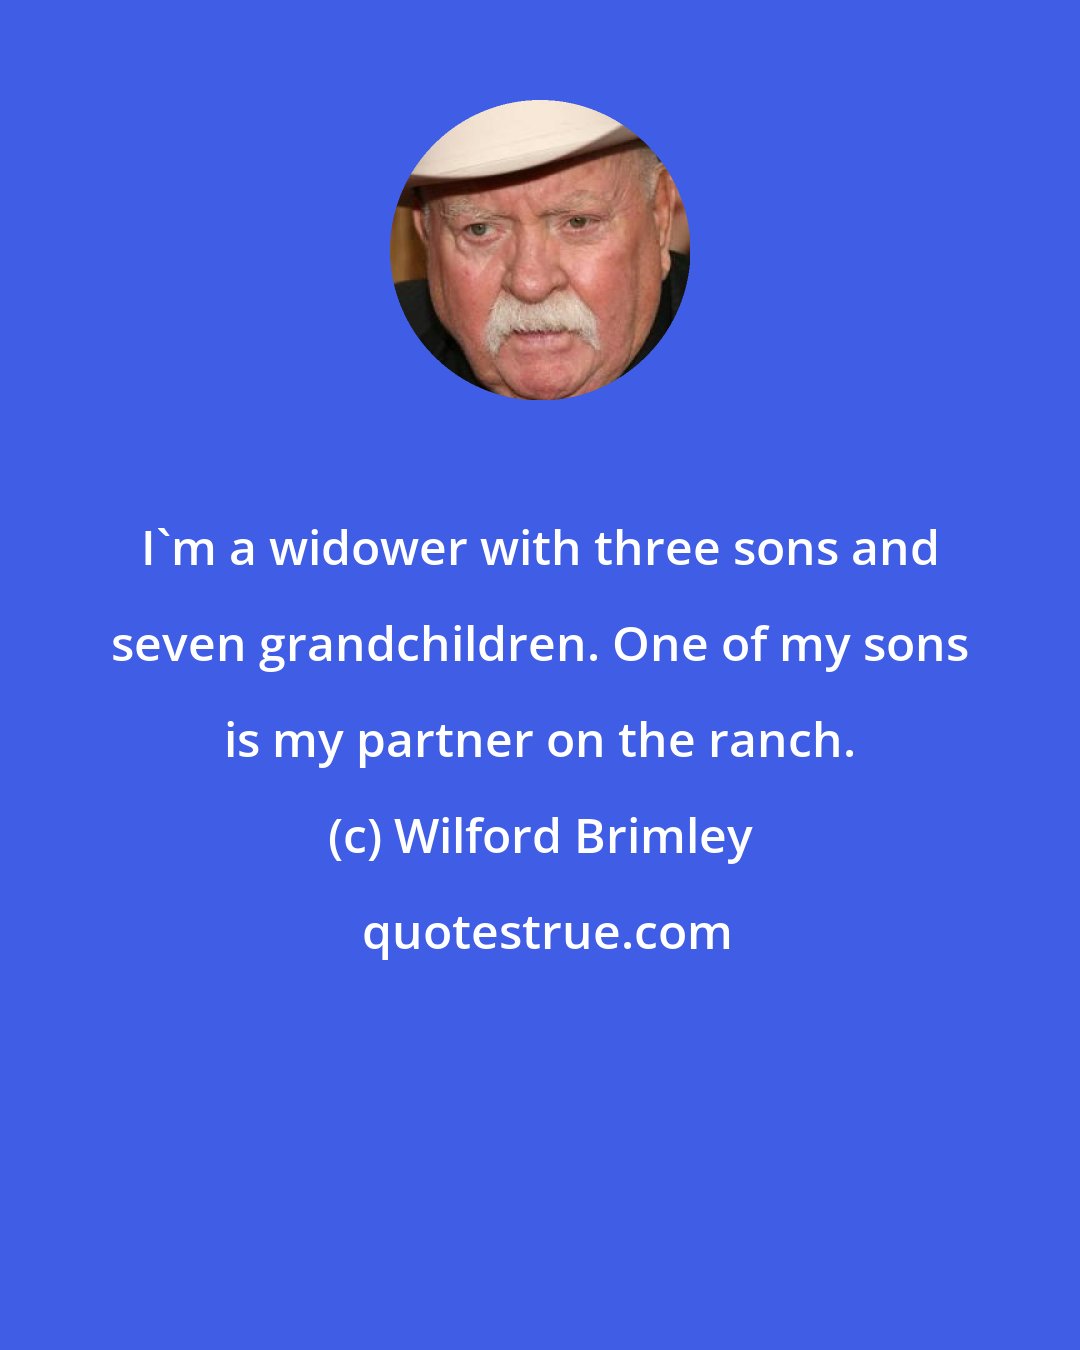 Wilford Brimley: I'm a widower with three sons and seven grandchildren. One of my sons is my partner on the ranch.